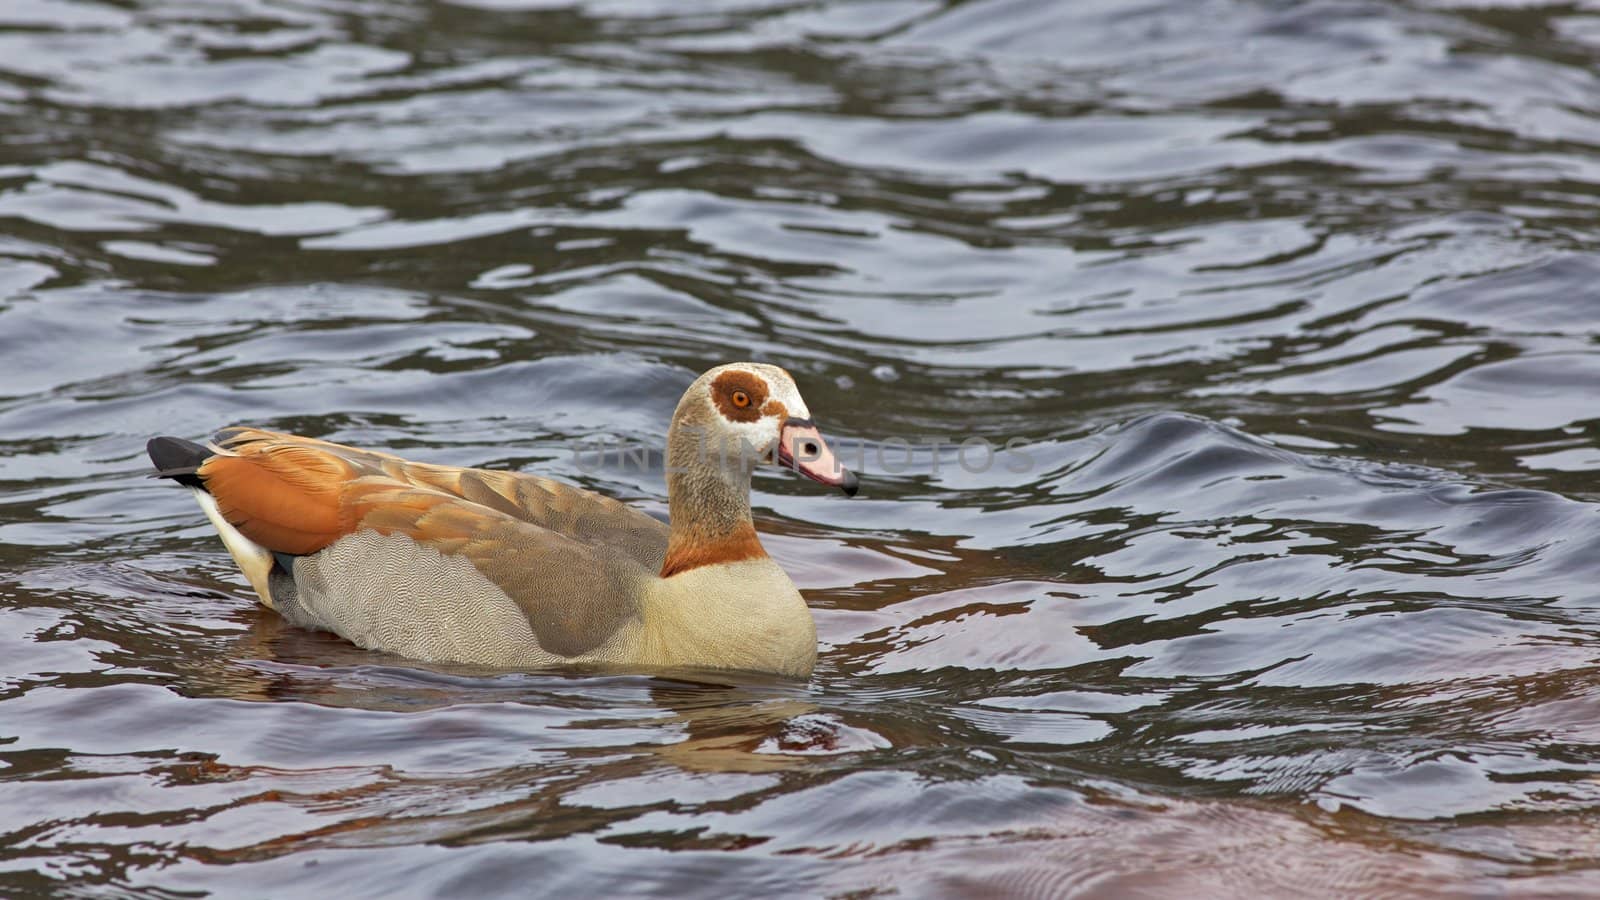 The Egyptian Goose (Alopochen aegyptiacus) is widely distributed across Africa and southern Europe.